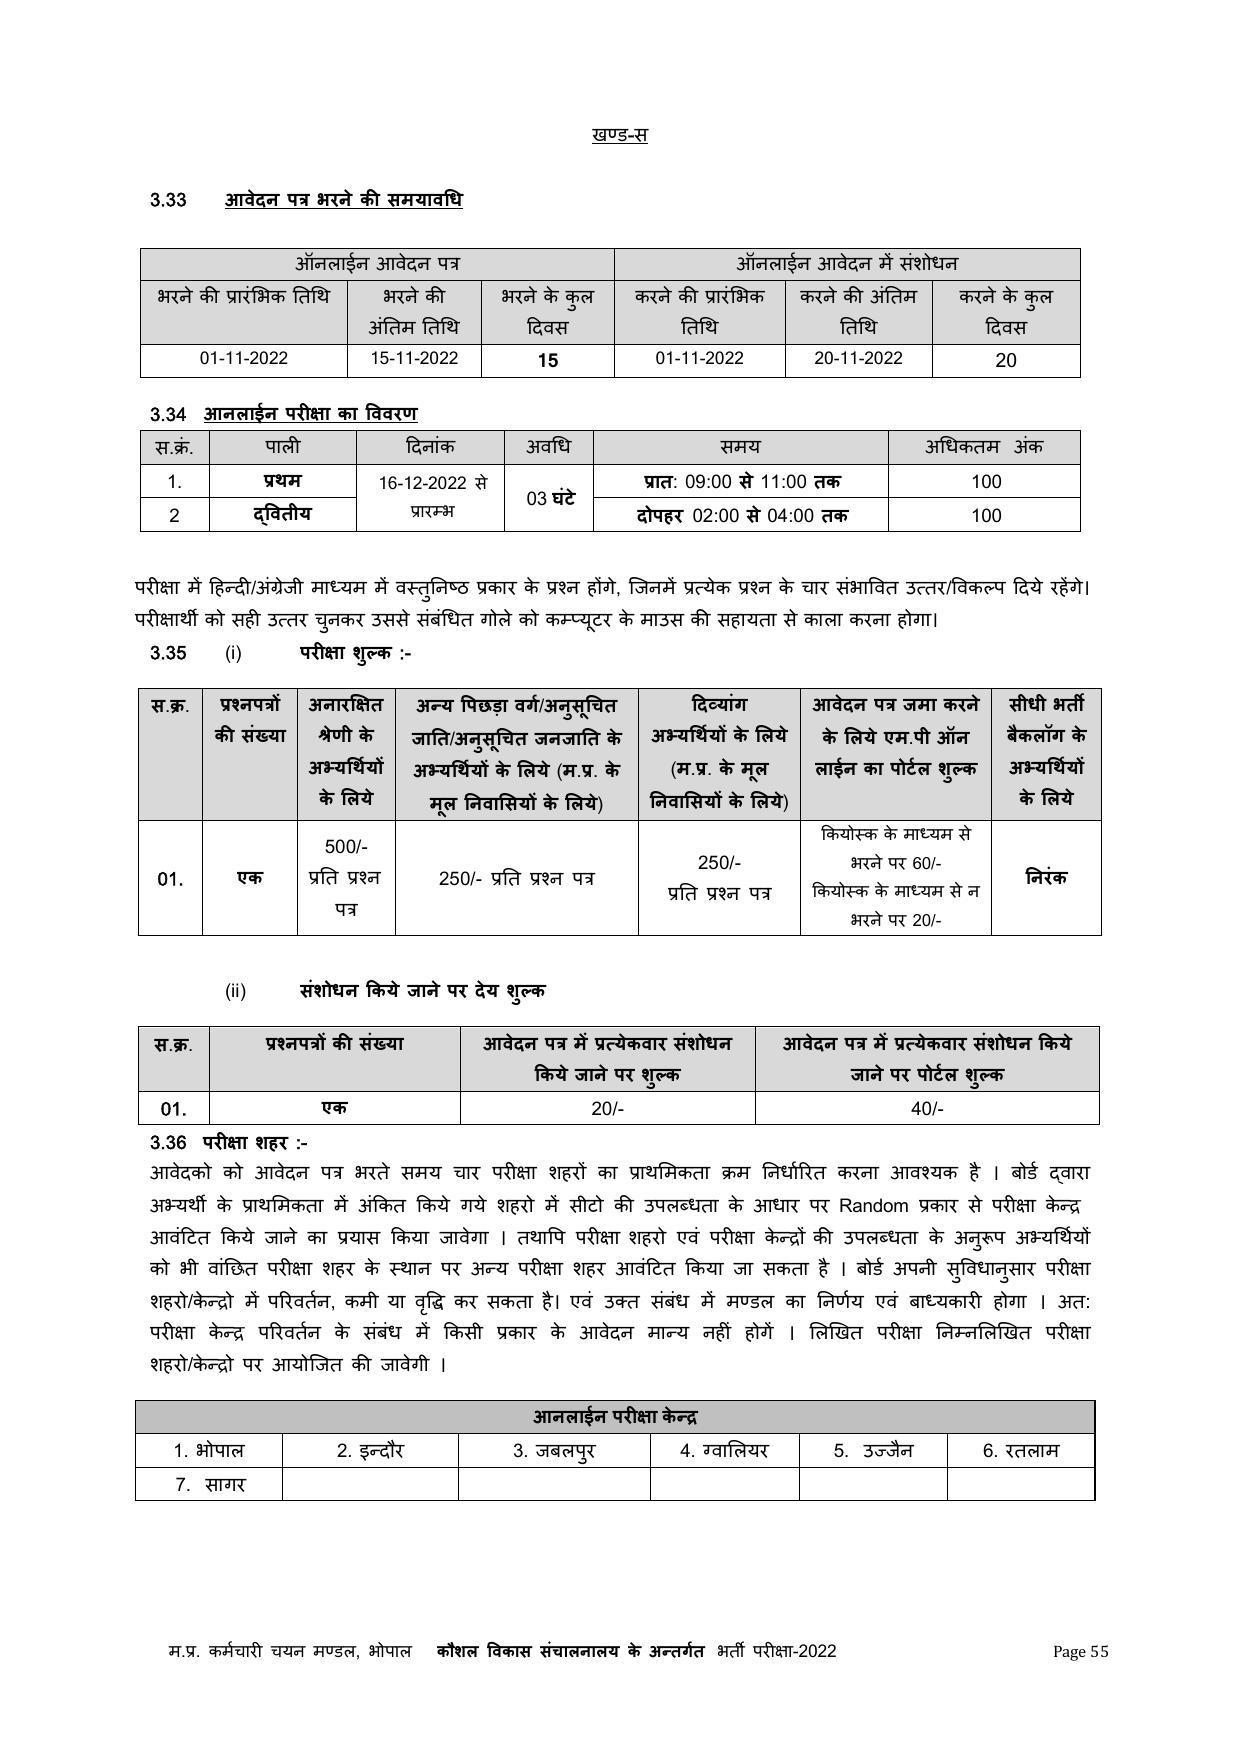 MPPEB Invites Application for 305 ITI Training Officer Recruitment 2022 - Page 60